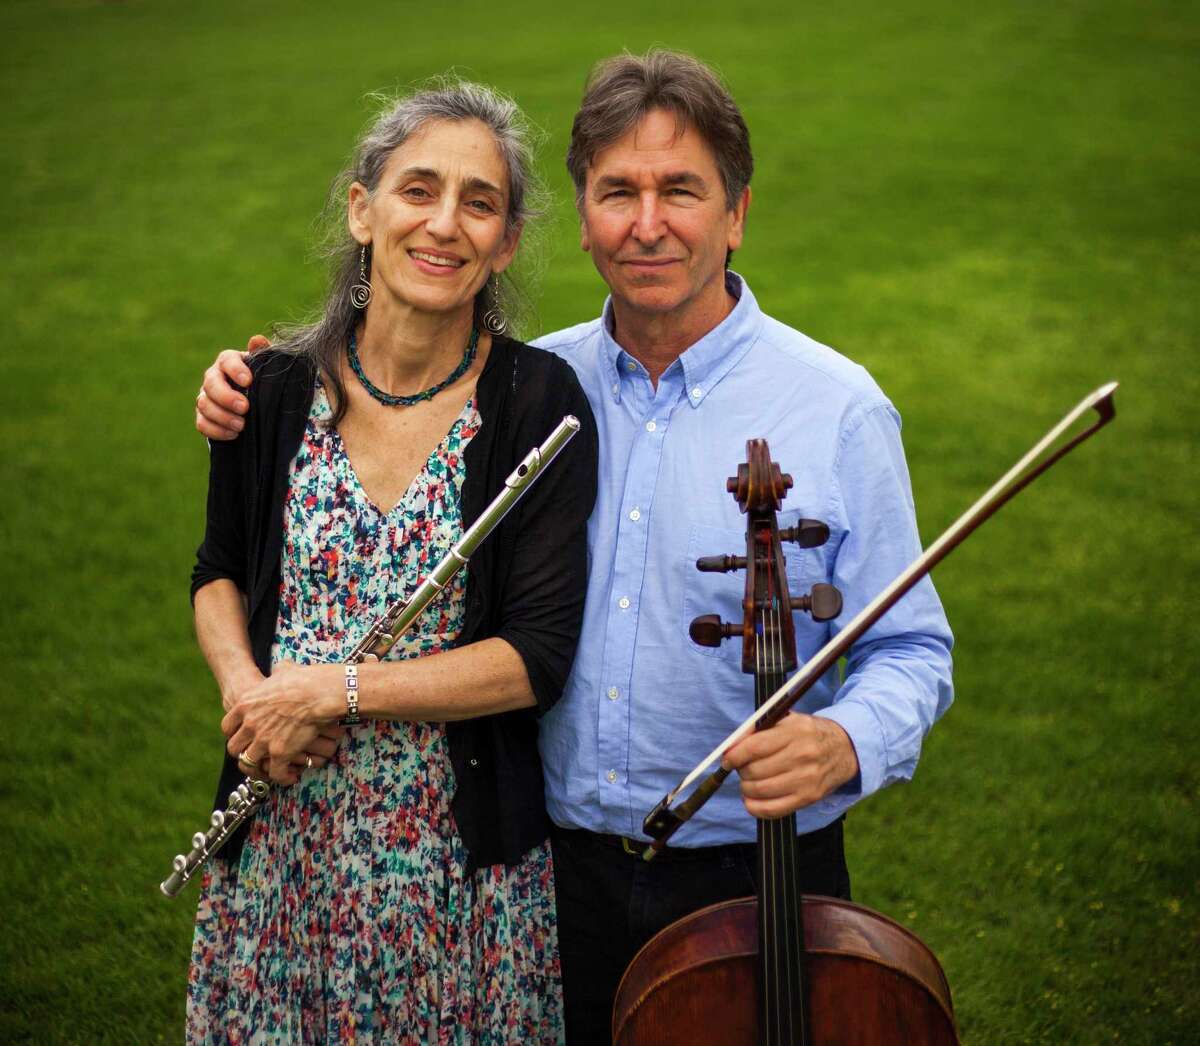 From left, Eliot Bailen and Susan Rotholz